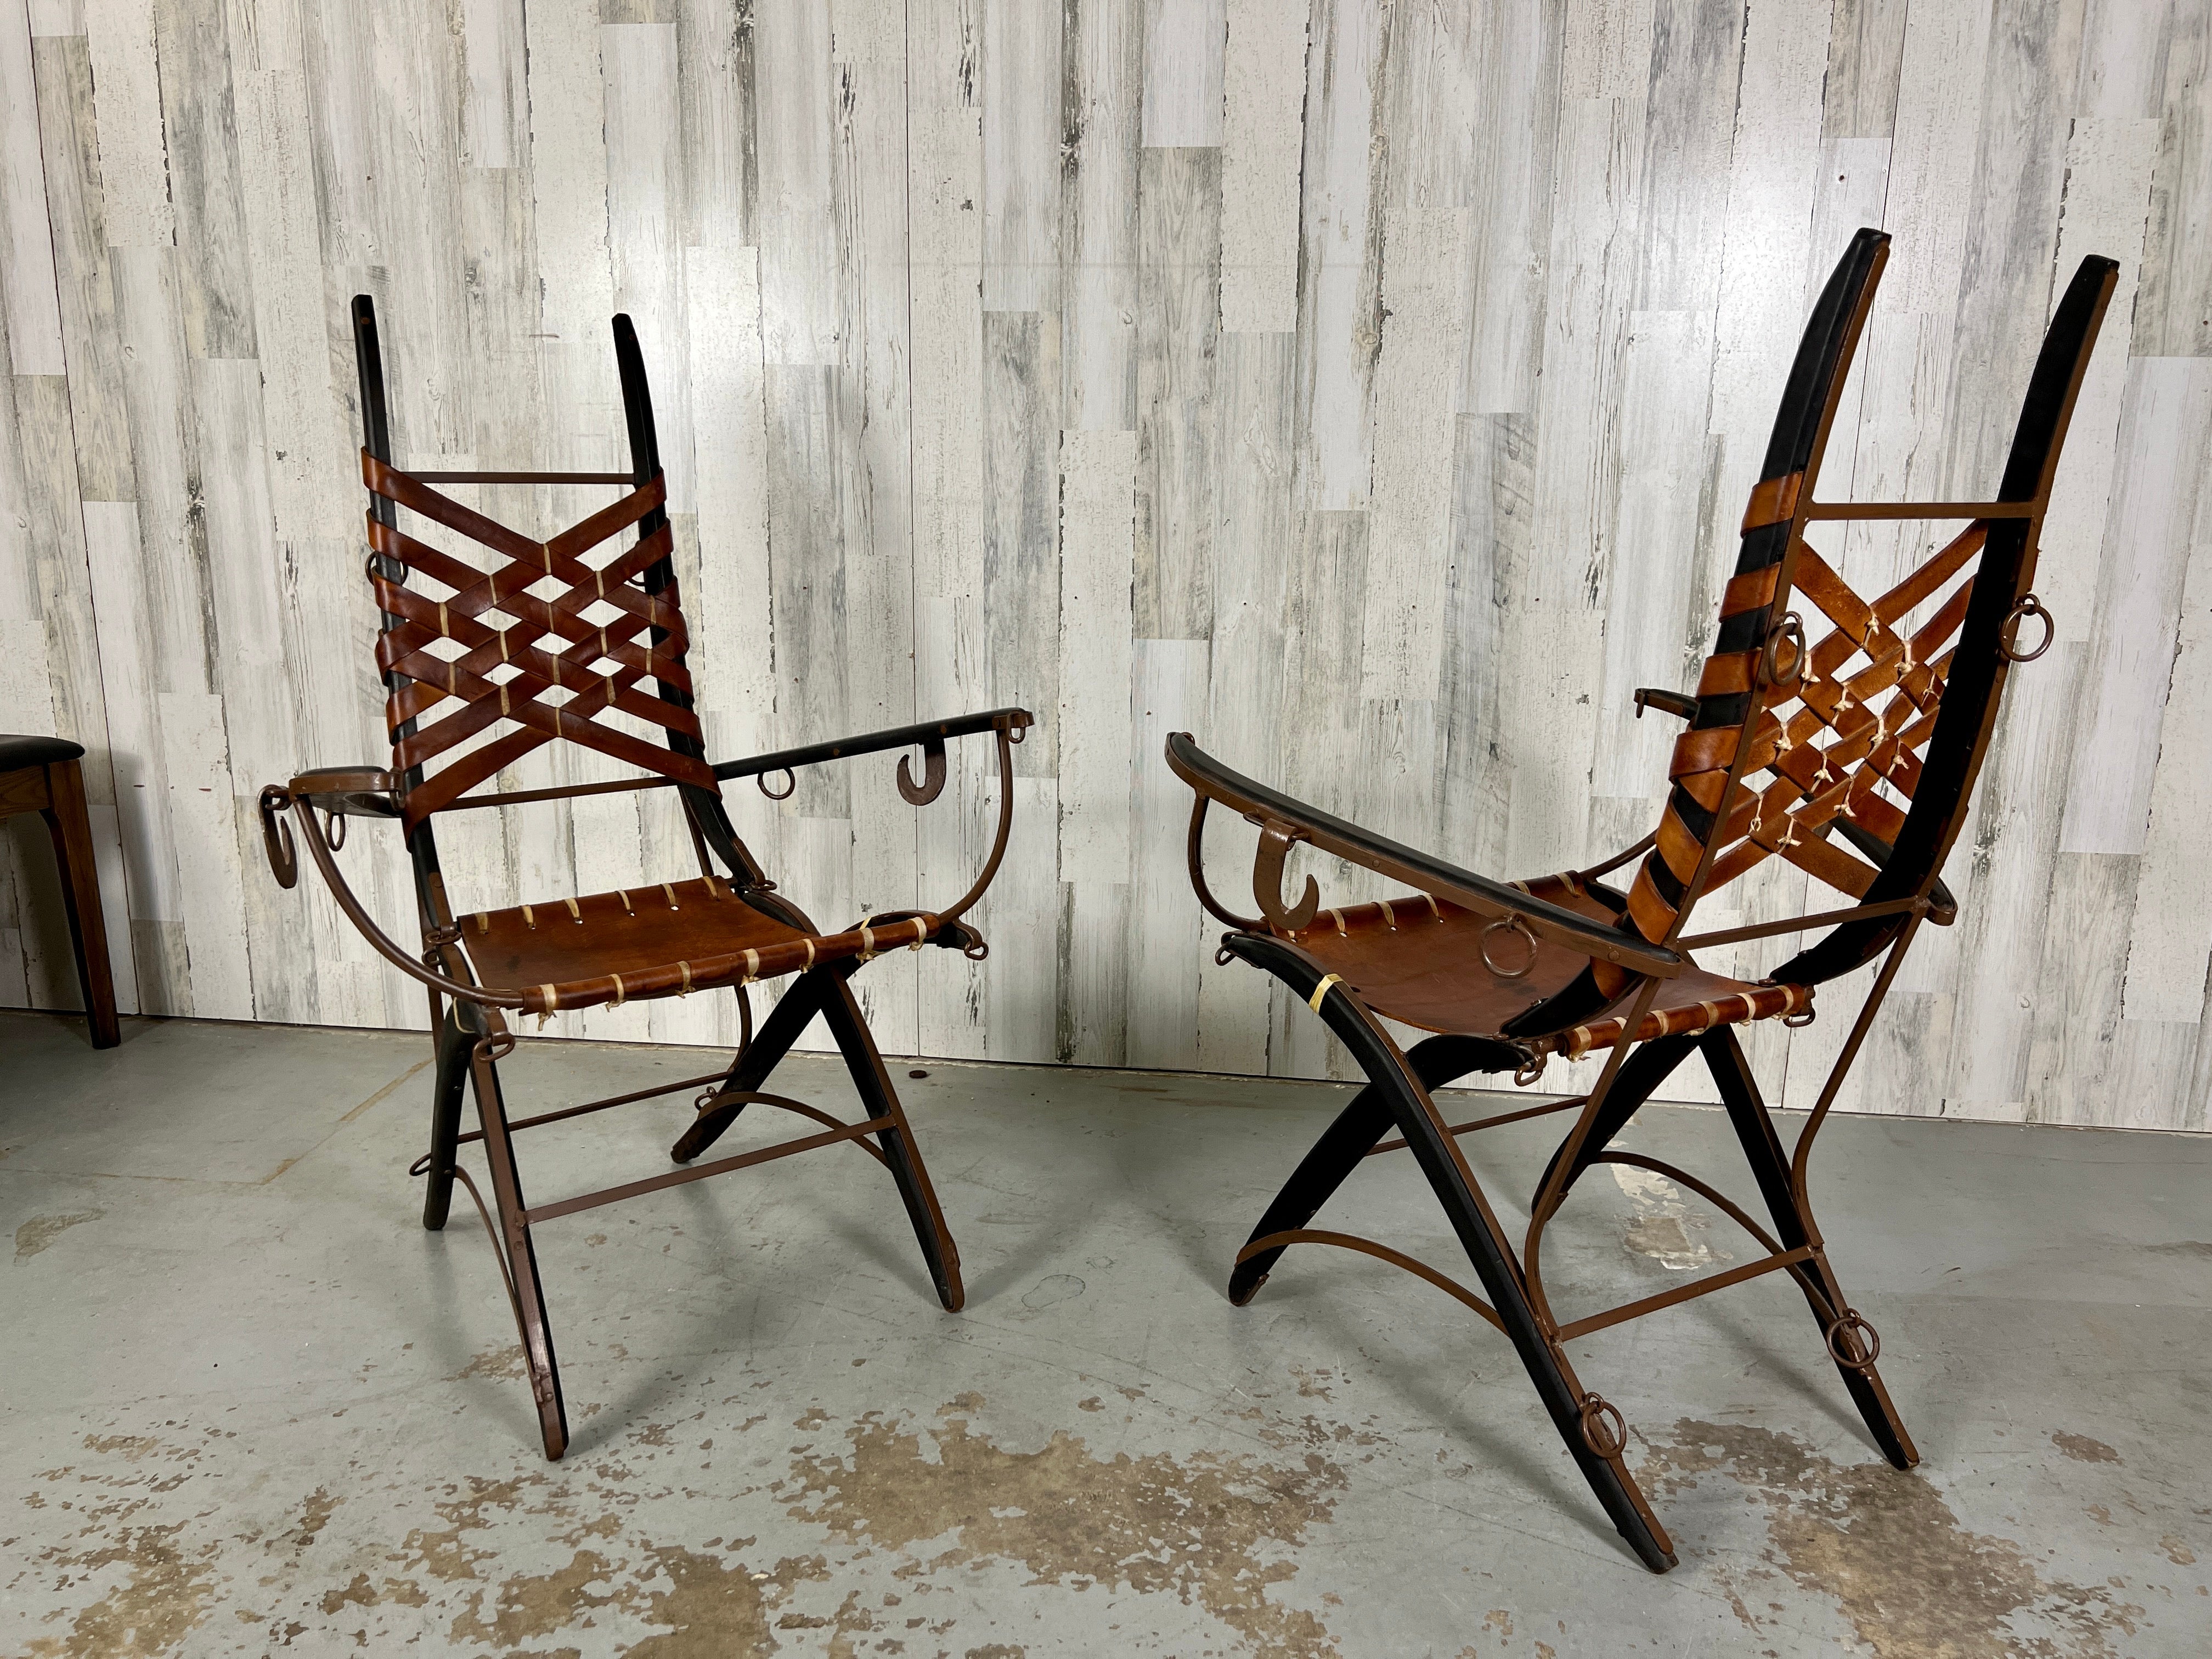 A pair of side chairs by Italian designer Alberto Marconetti, Italian, 1960s. Design .crafted in Iron, oak, leather. Sculpted oak and iron with iron hooks and rings as accents. 
Basket weave design leather back with parchment ties add to the rustic